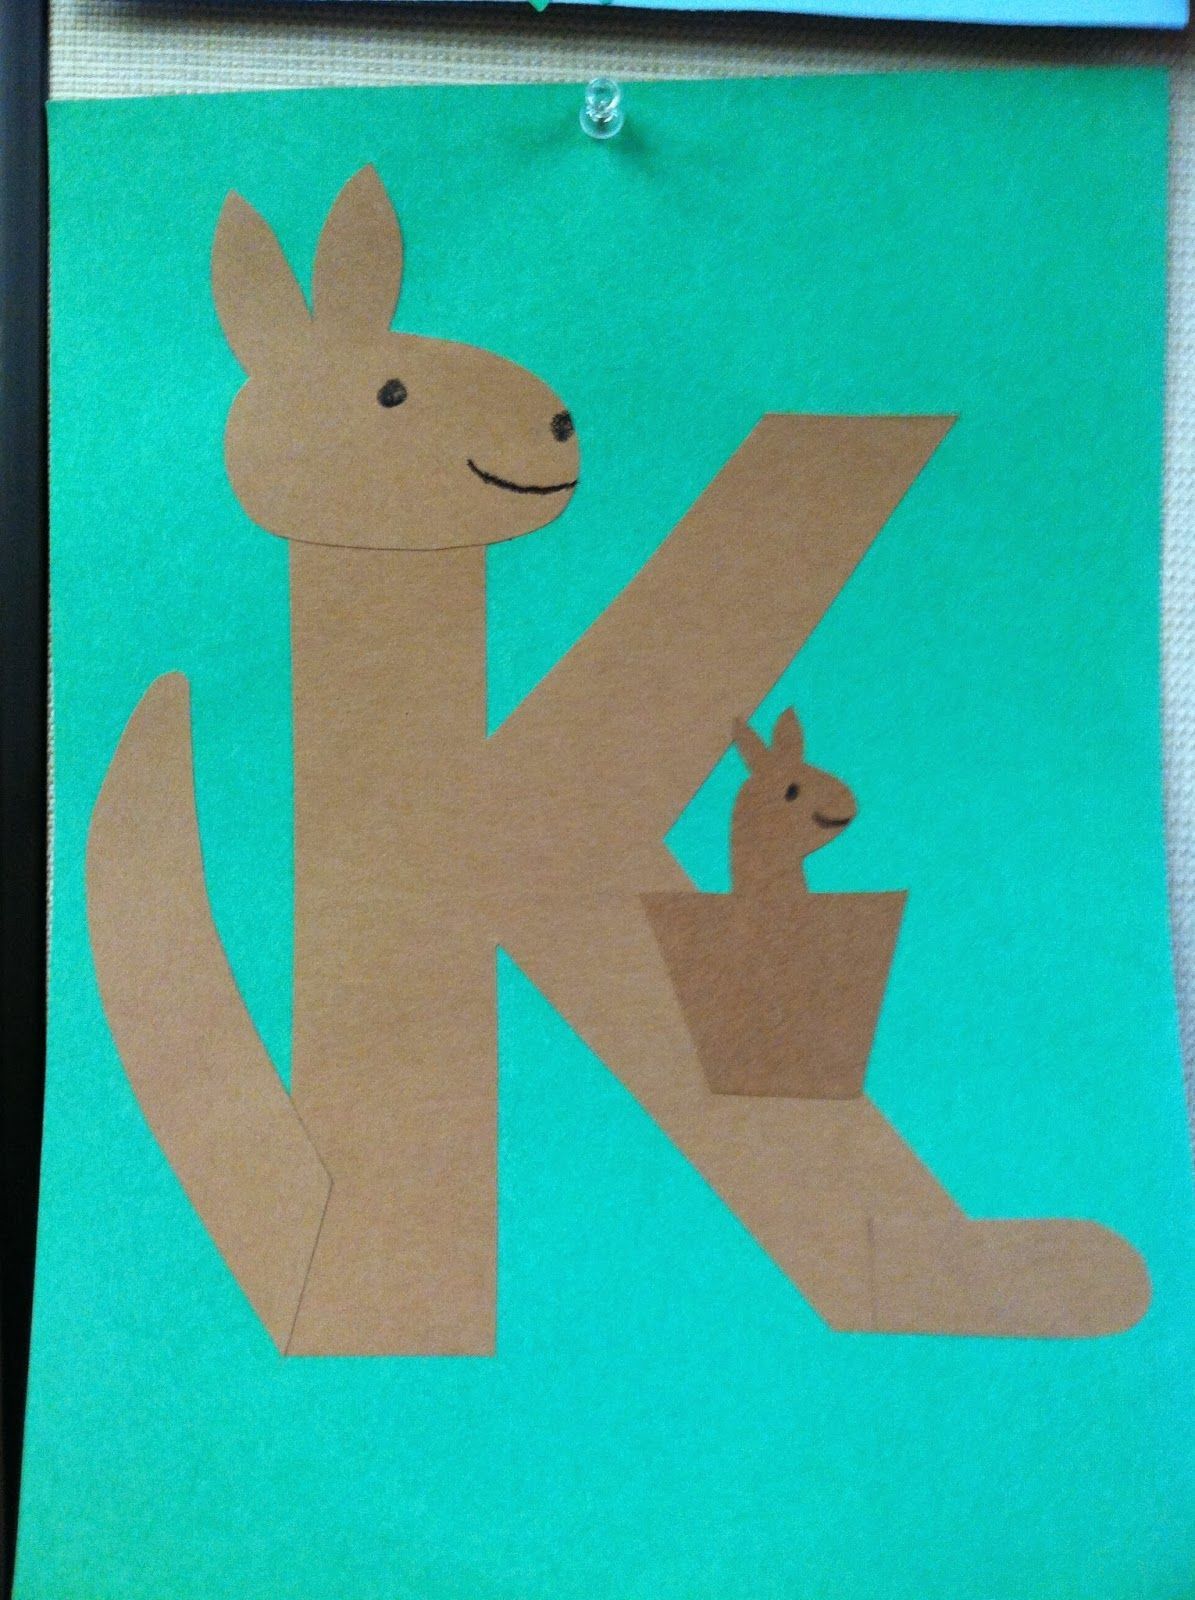 K is for Kangaroo storytime – books, songs, rhymes, and craft